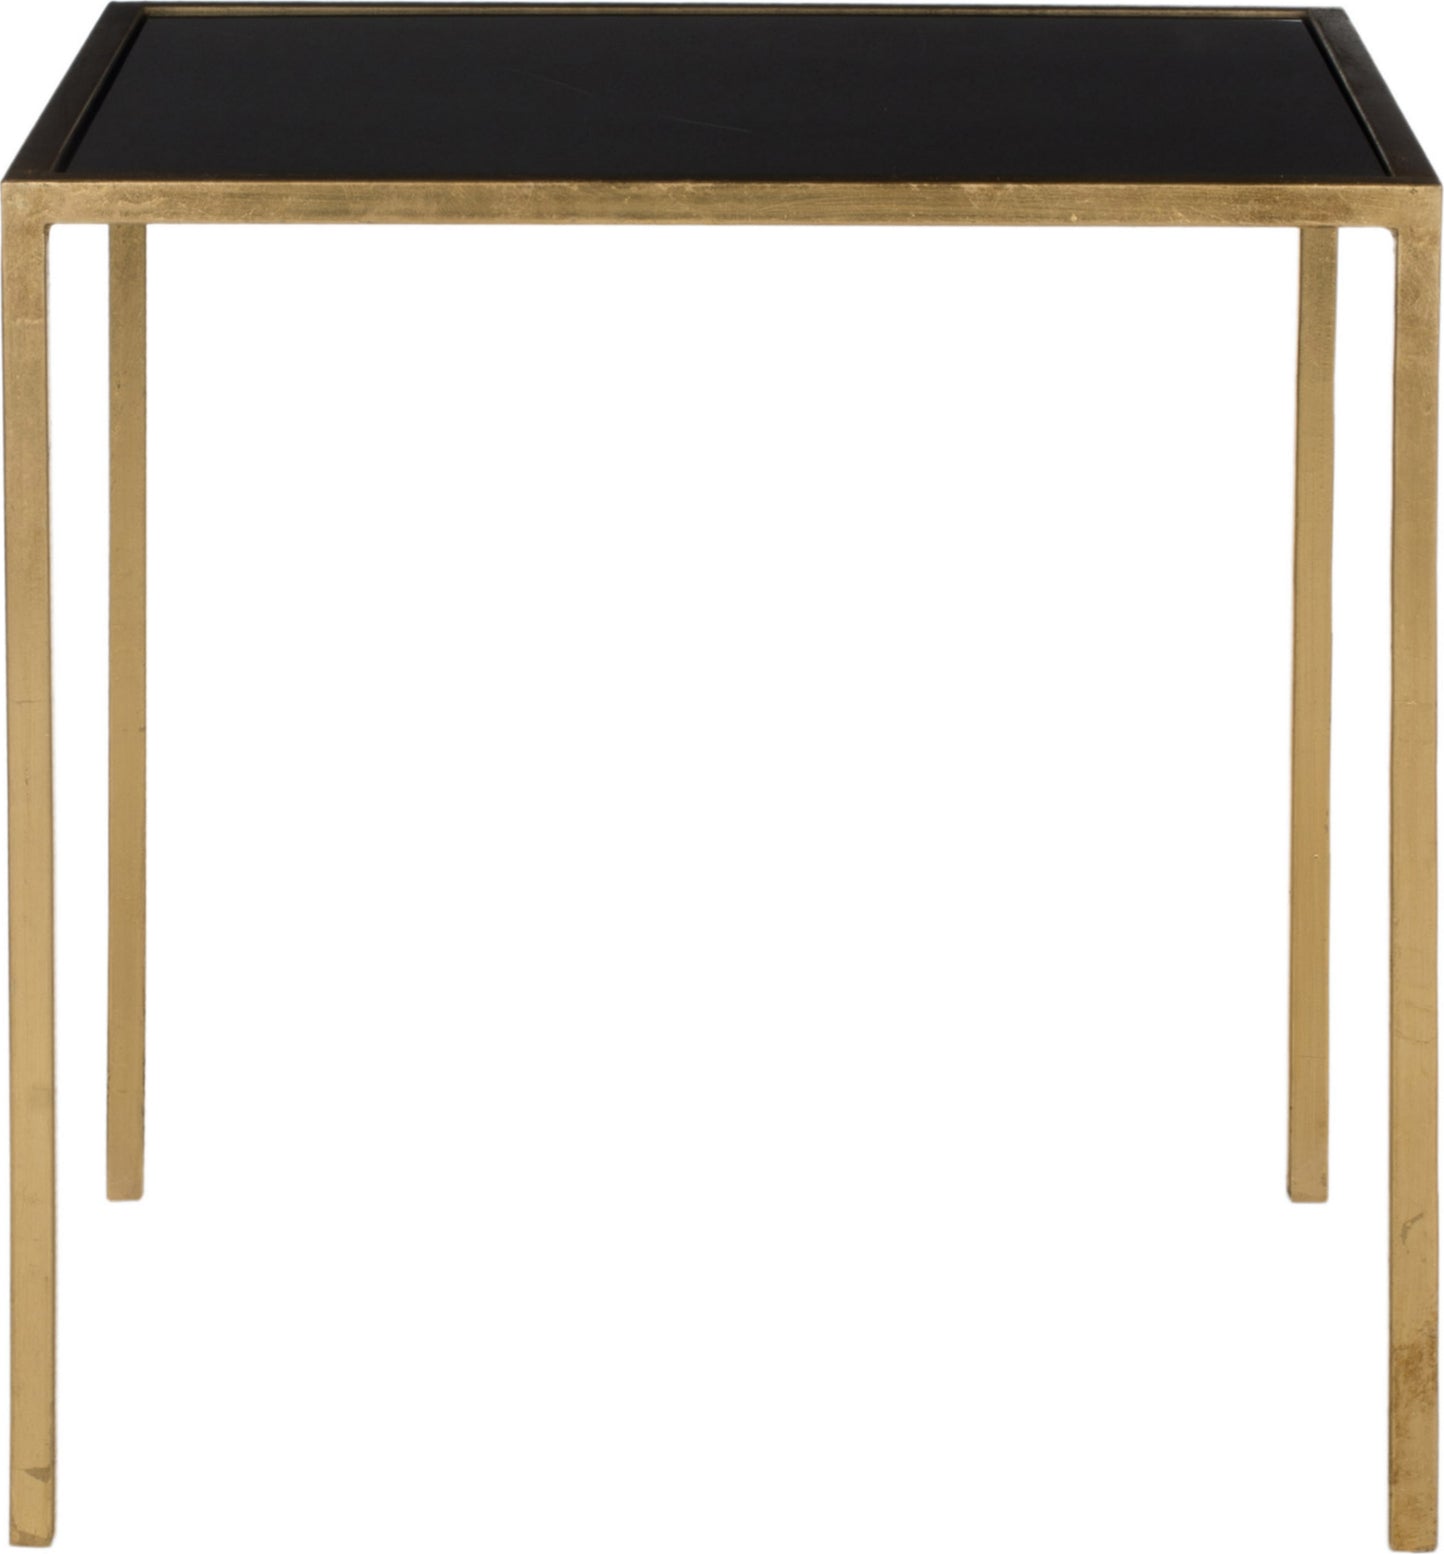 Safavieh Kiley Gold Leaf Mirror Top Accent Table and Black Furniture main image